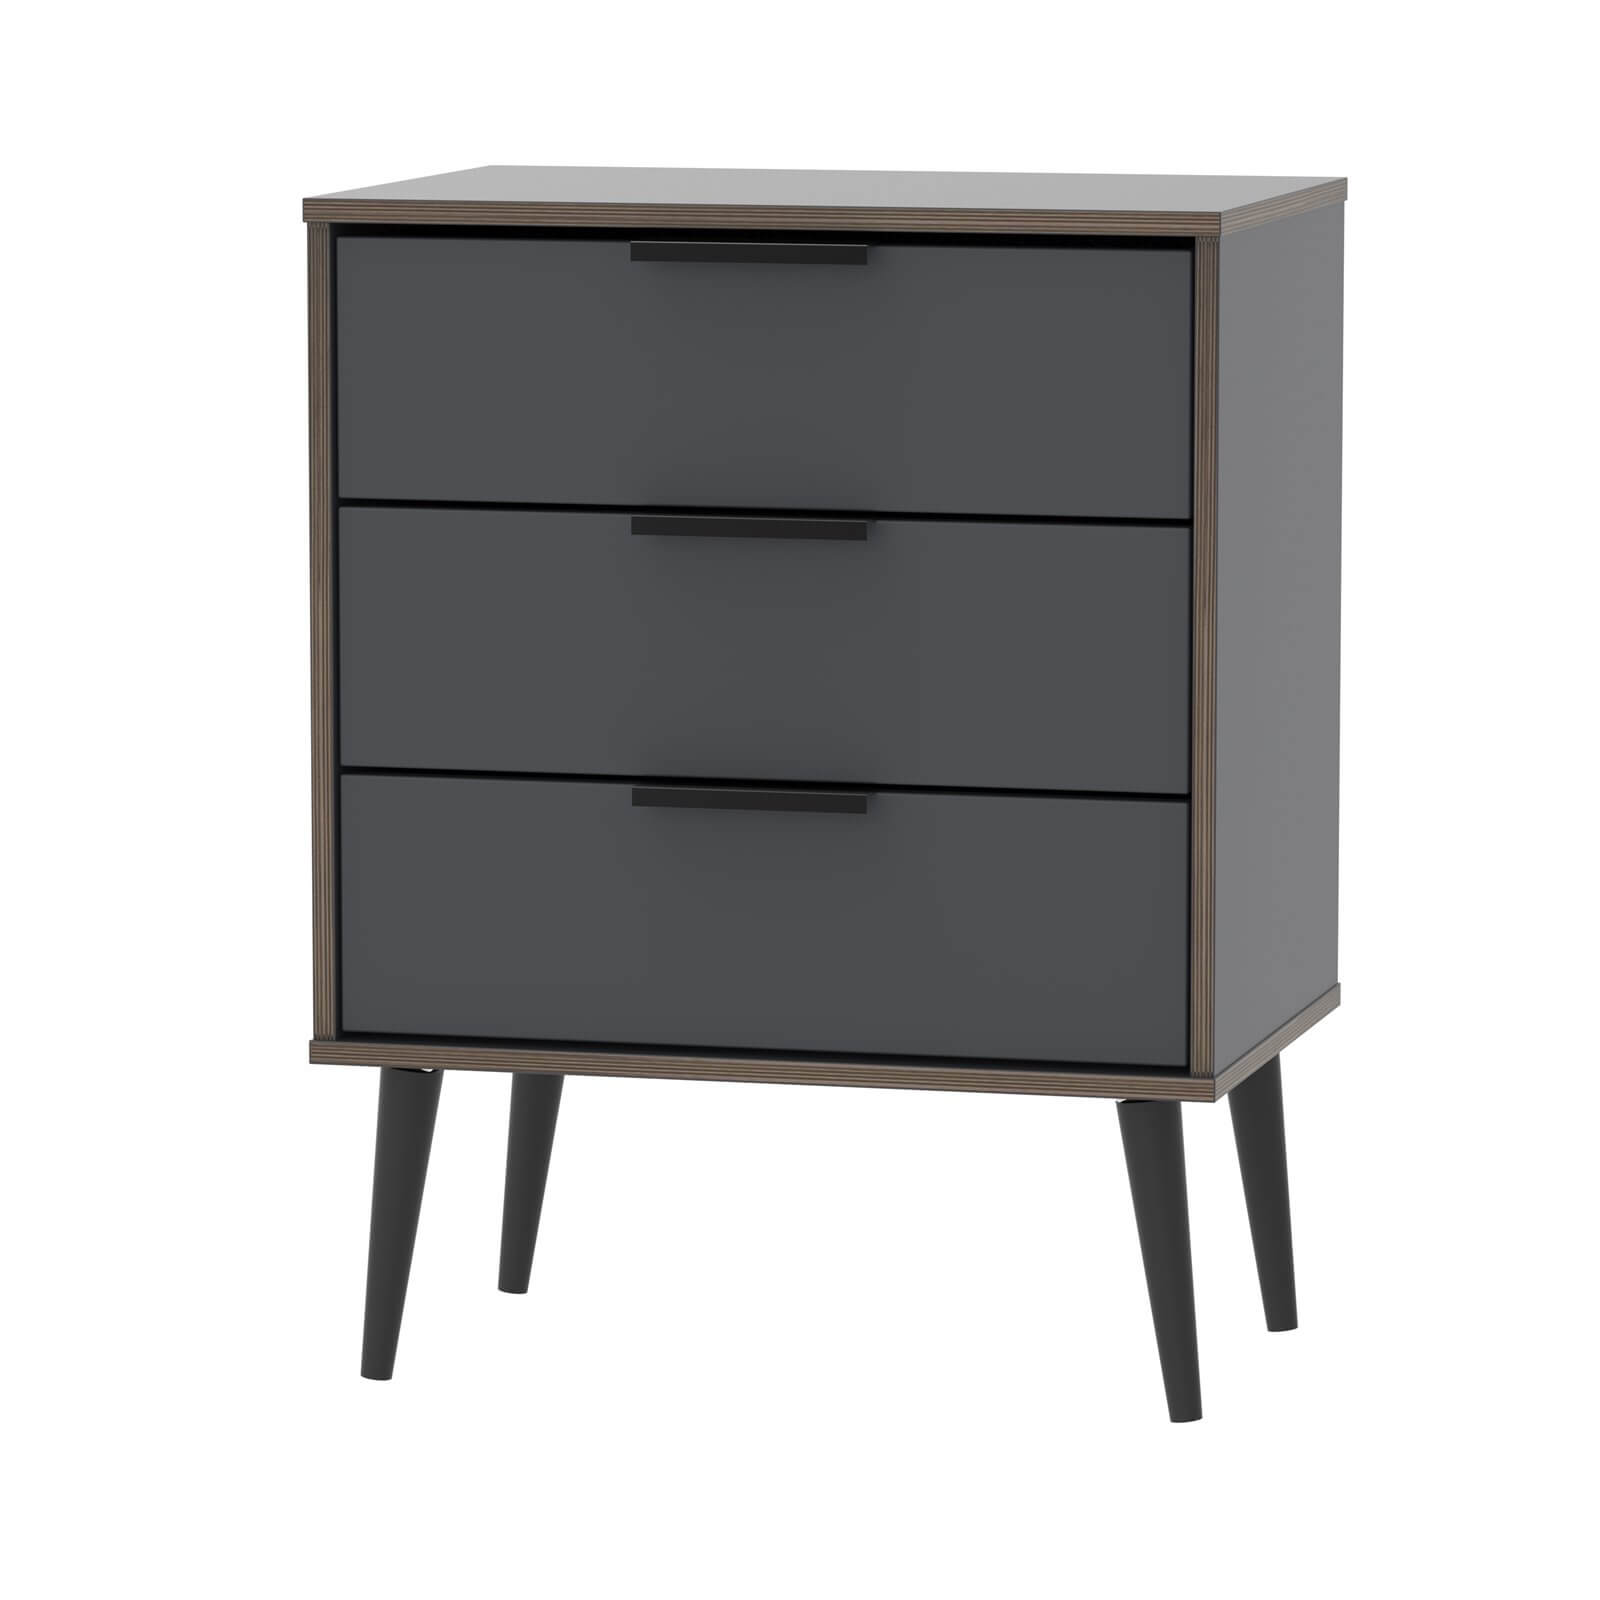 Tokyo 3 Drawer Chest with Legs - Graphite